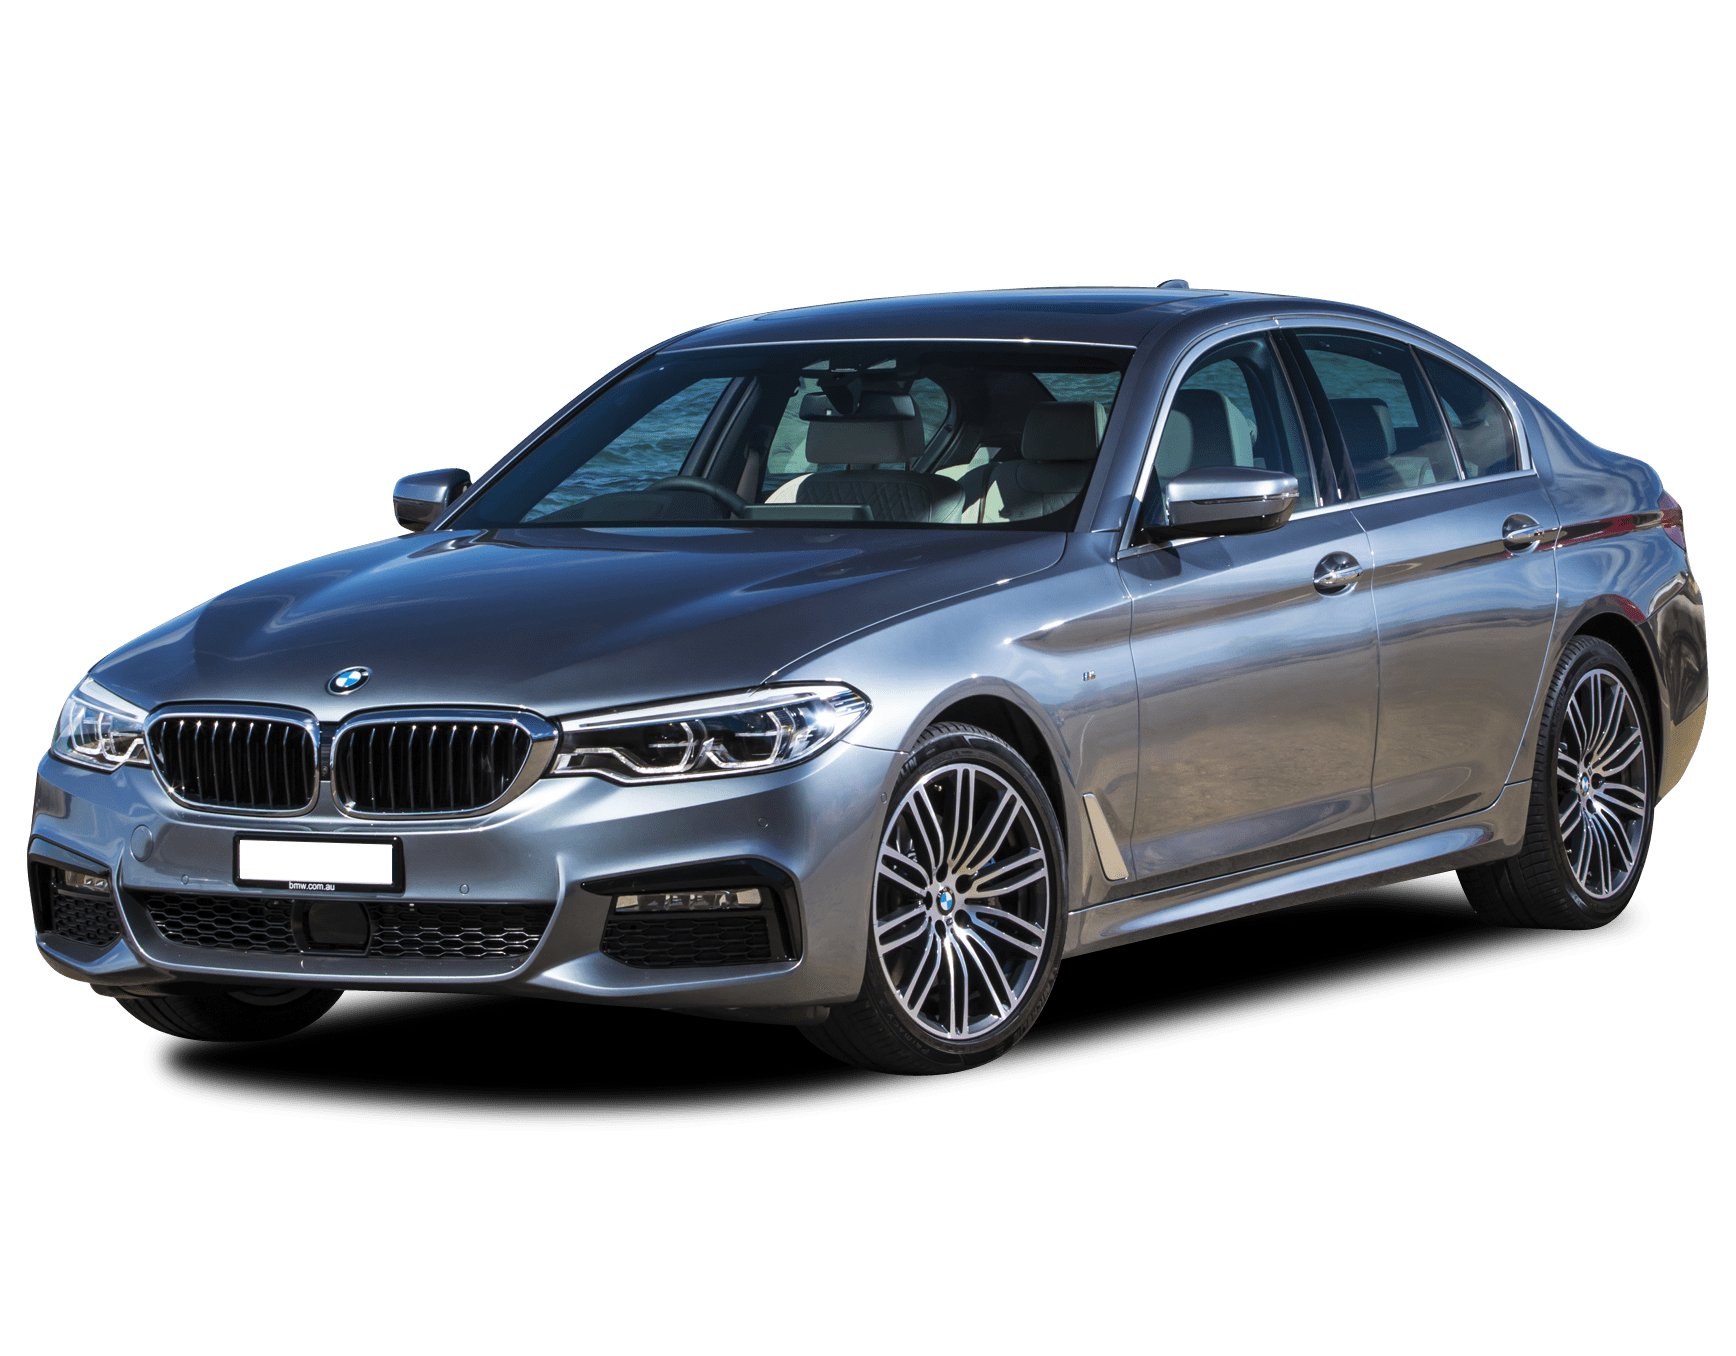 Bmw 528i Review For Sale Specs Models In Australia Carsguide